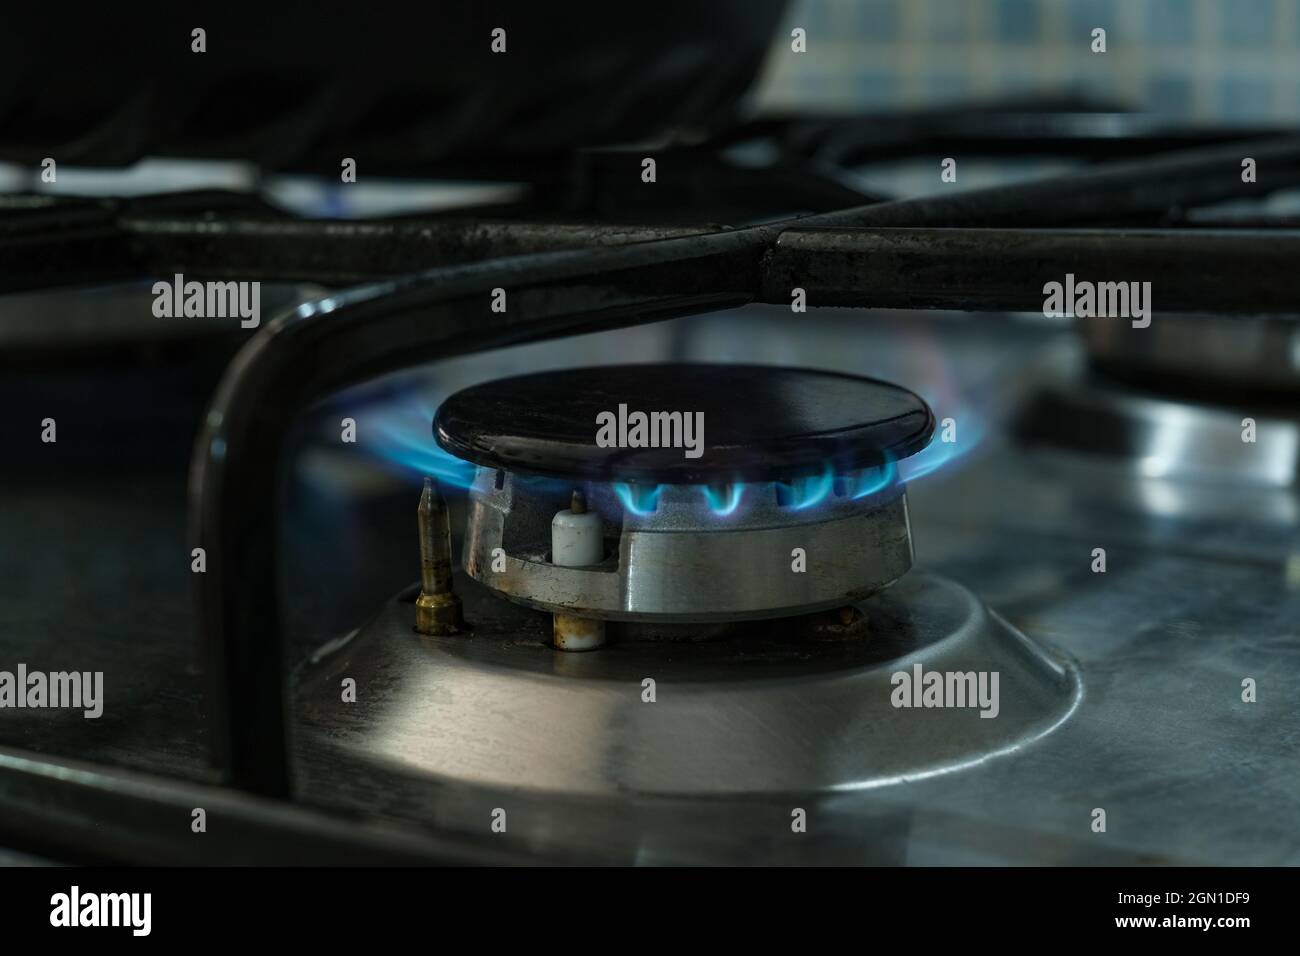 Lpg propane gas cooker close up while burning,not renewable energy wastage Stock Photo